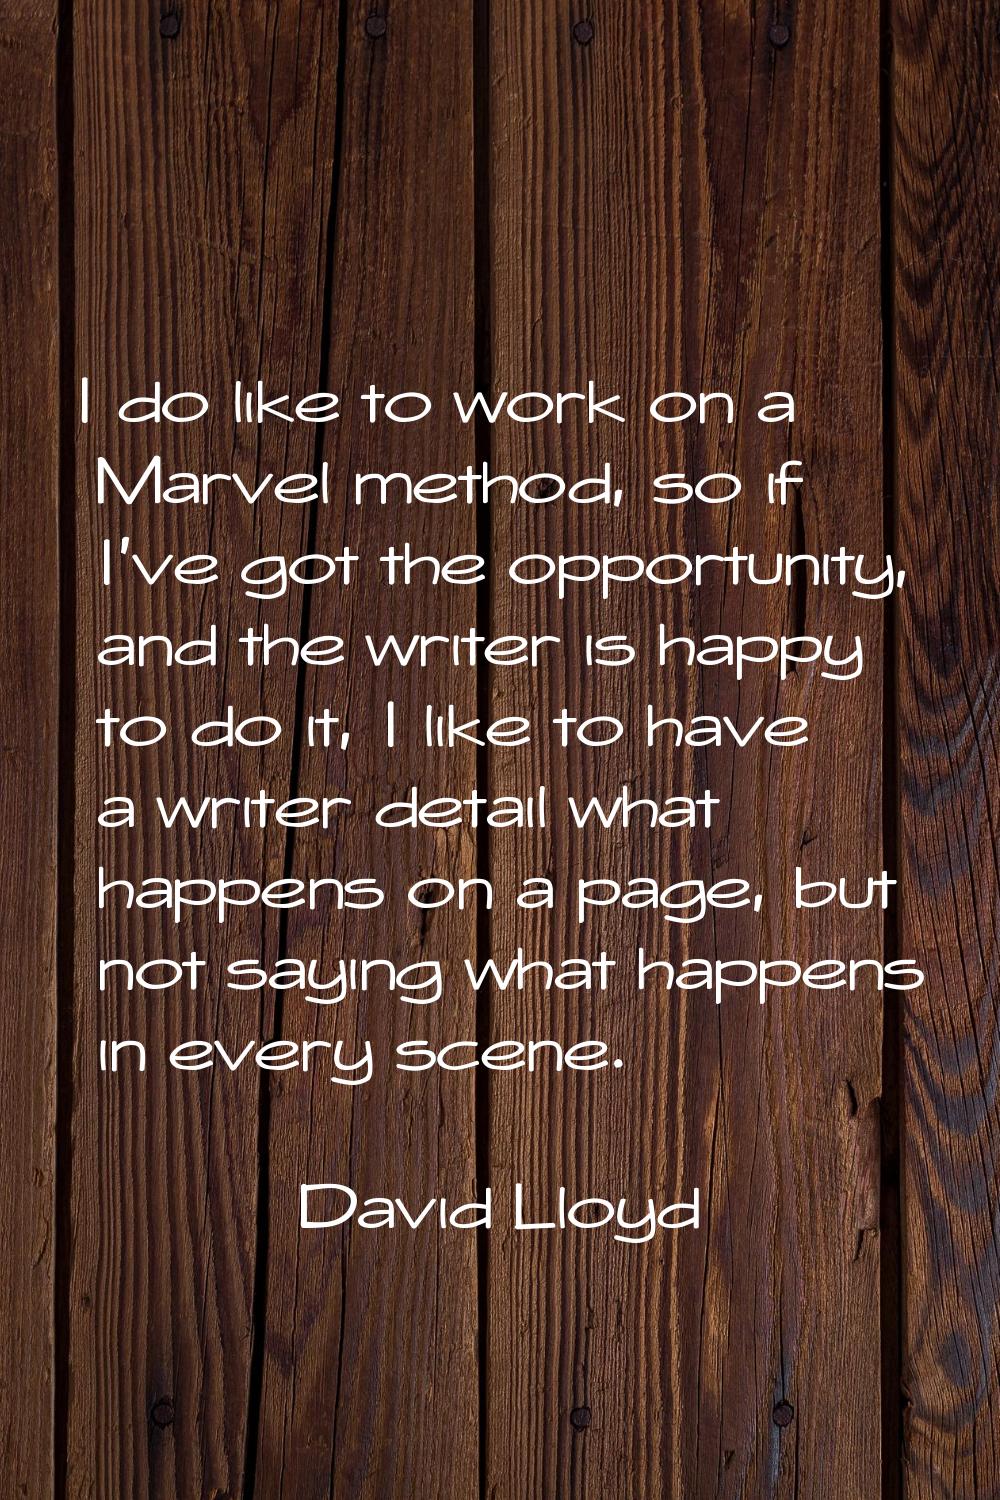 I do like to work on a Marvel method, so if I've got the opportunity, and the writer is happy to do